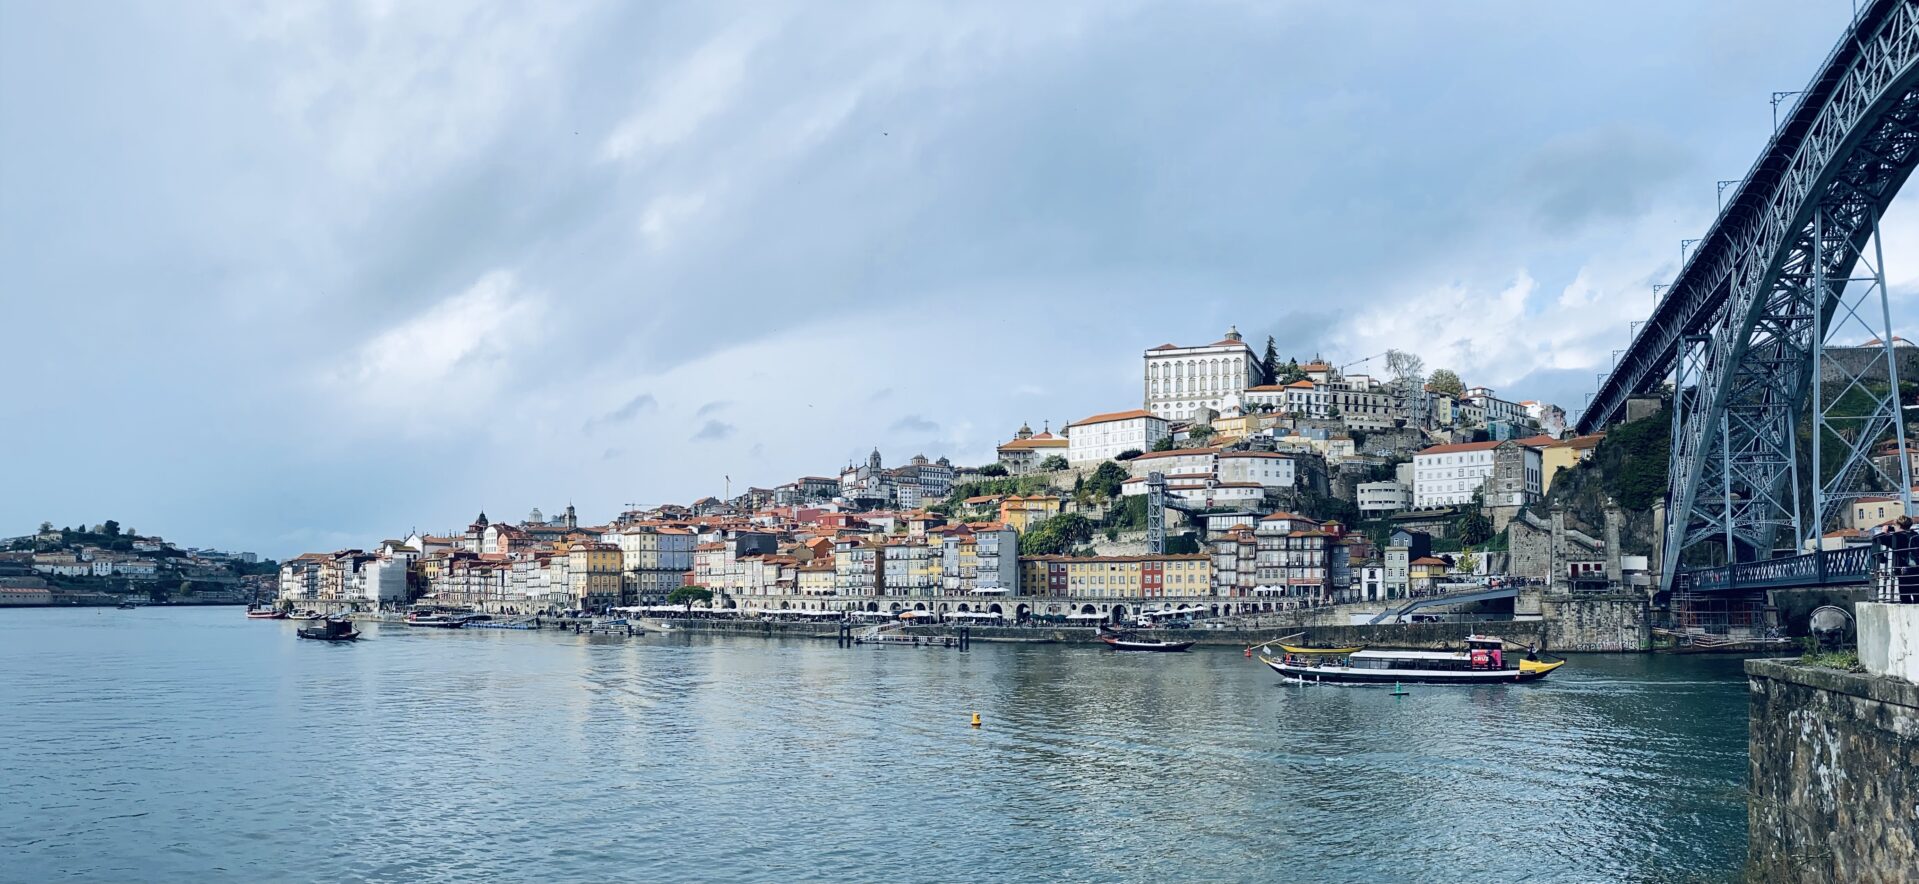 Guide to Portuguese Visas for Digital Nomads & Remote Workers